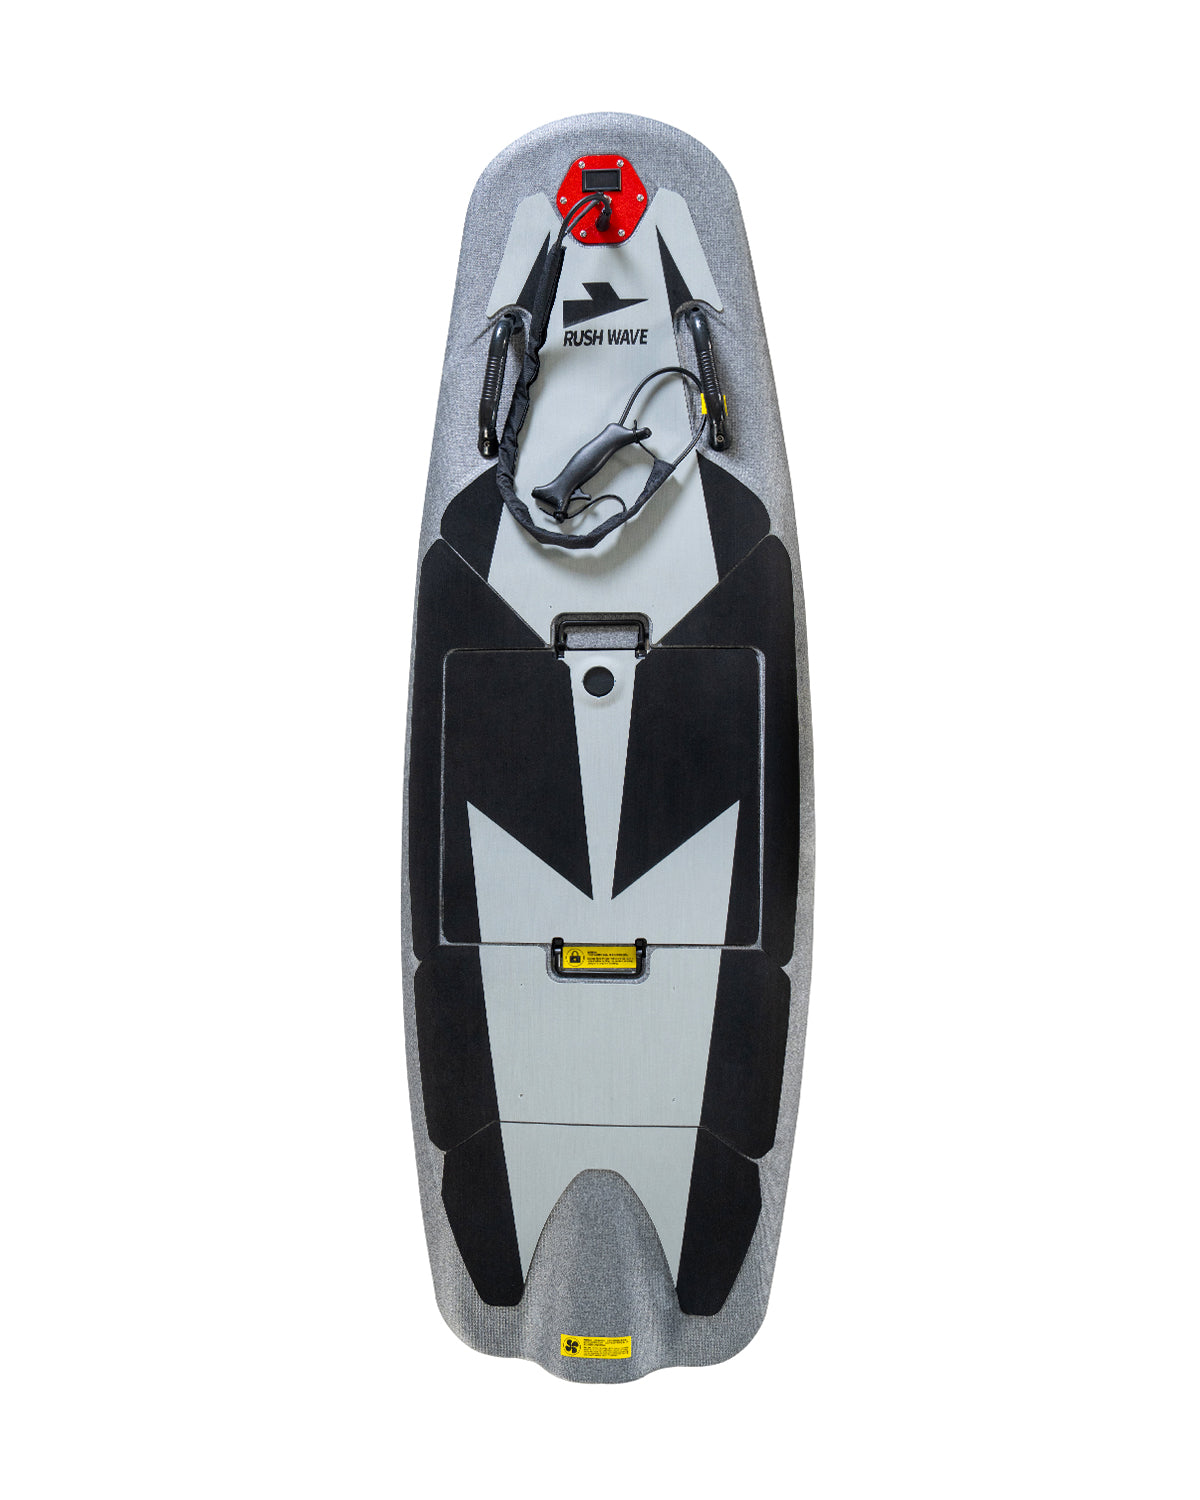 RUSH WAVE | Electric Surfboard | RIDER 12KW | Best